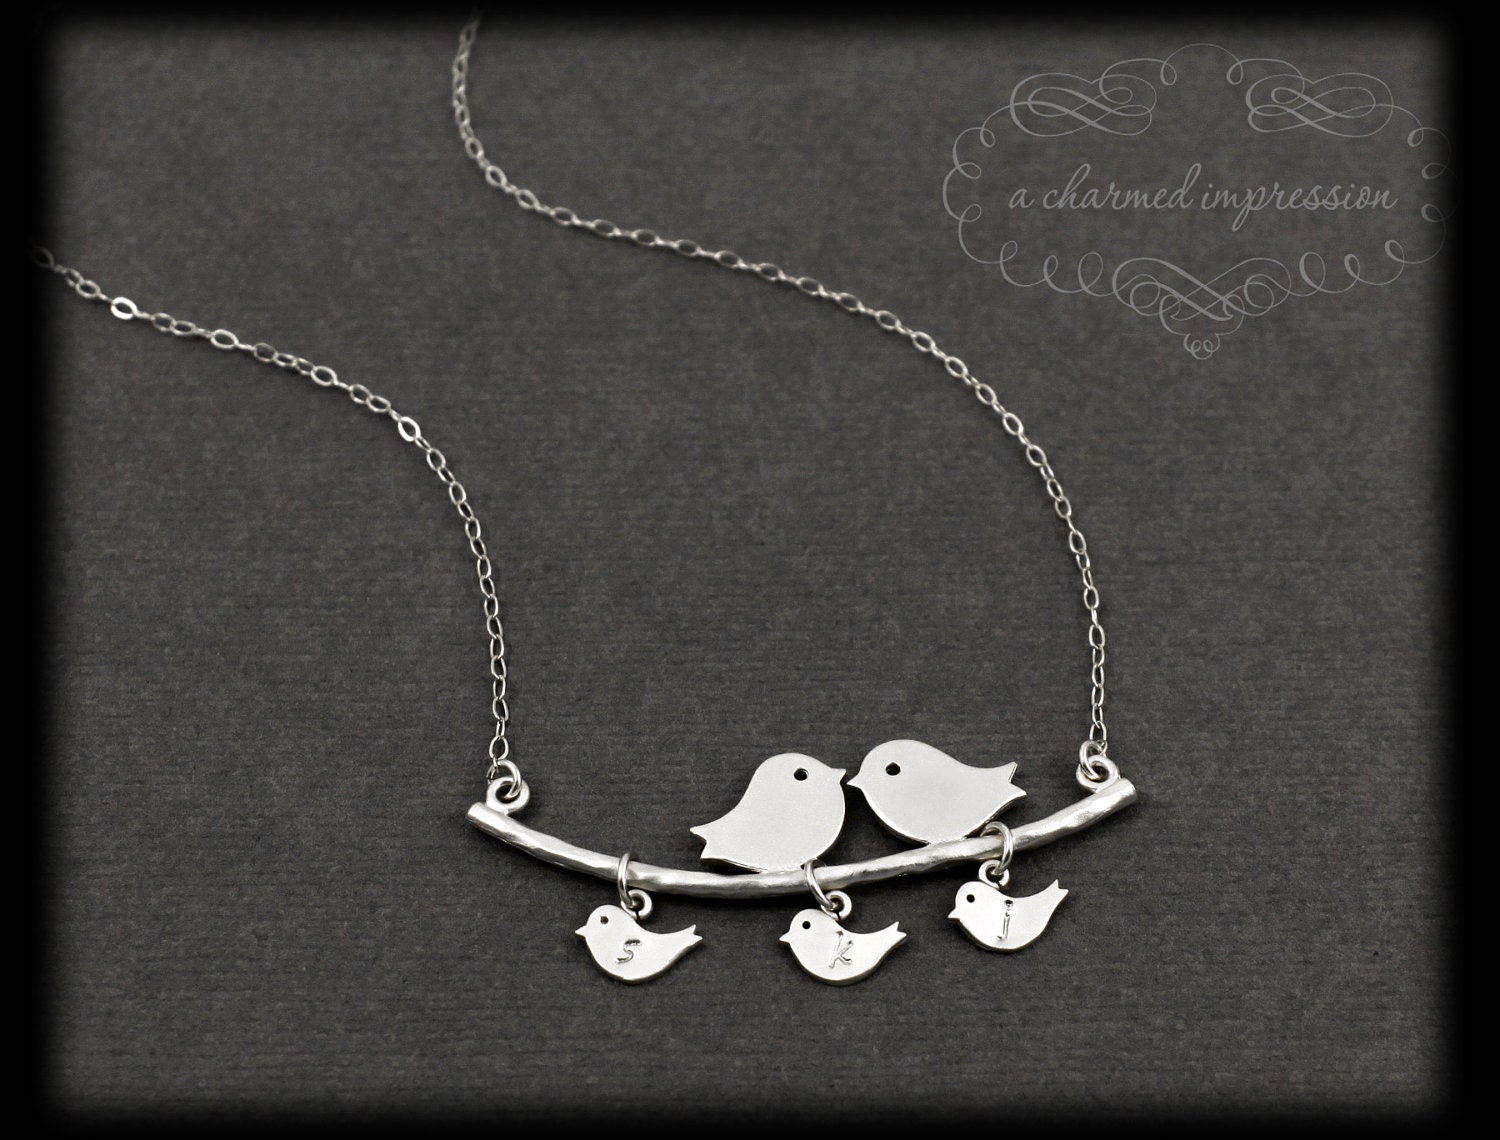 Personalized Mothers Necklace . 3 Baby Birds Necklace . Sterling Silver Bird Family Necklace . Bird Family Tree . OUR LITTLE FAMILY - ACharmedImpression